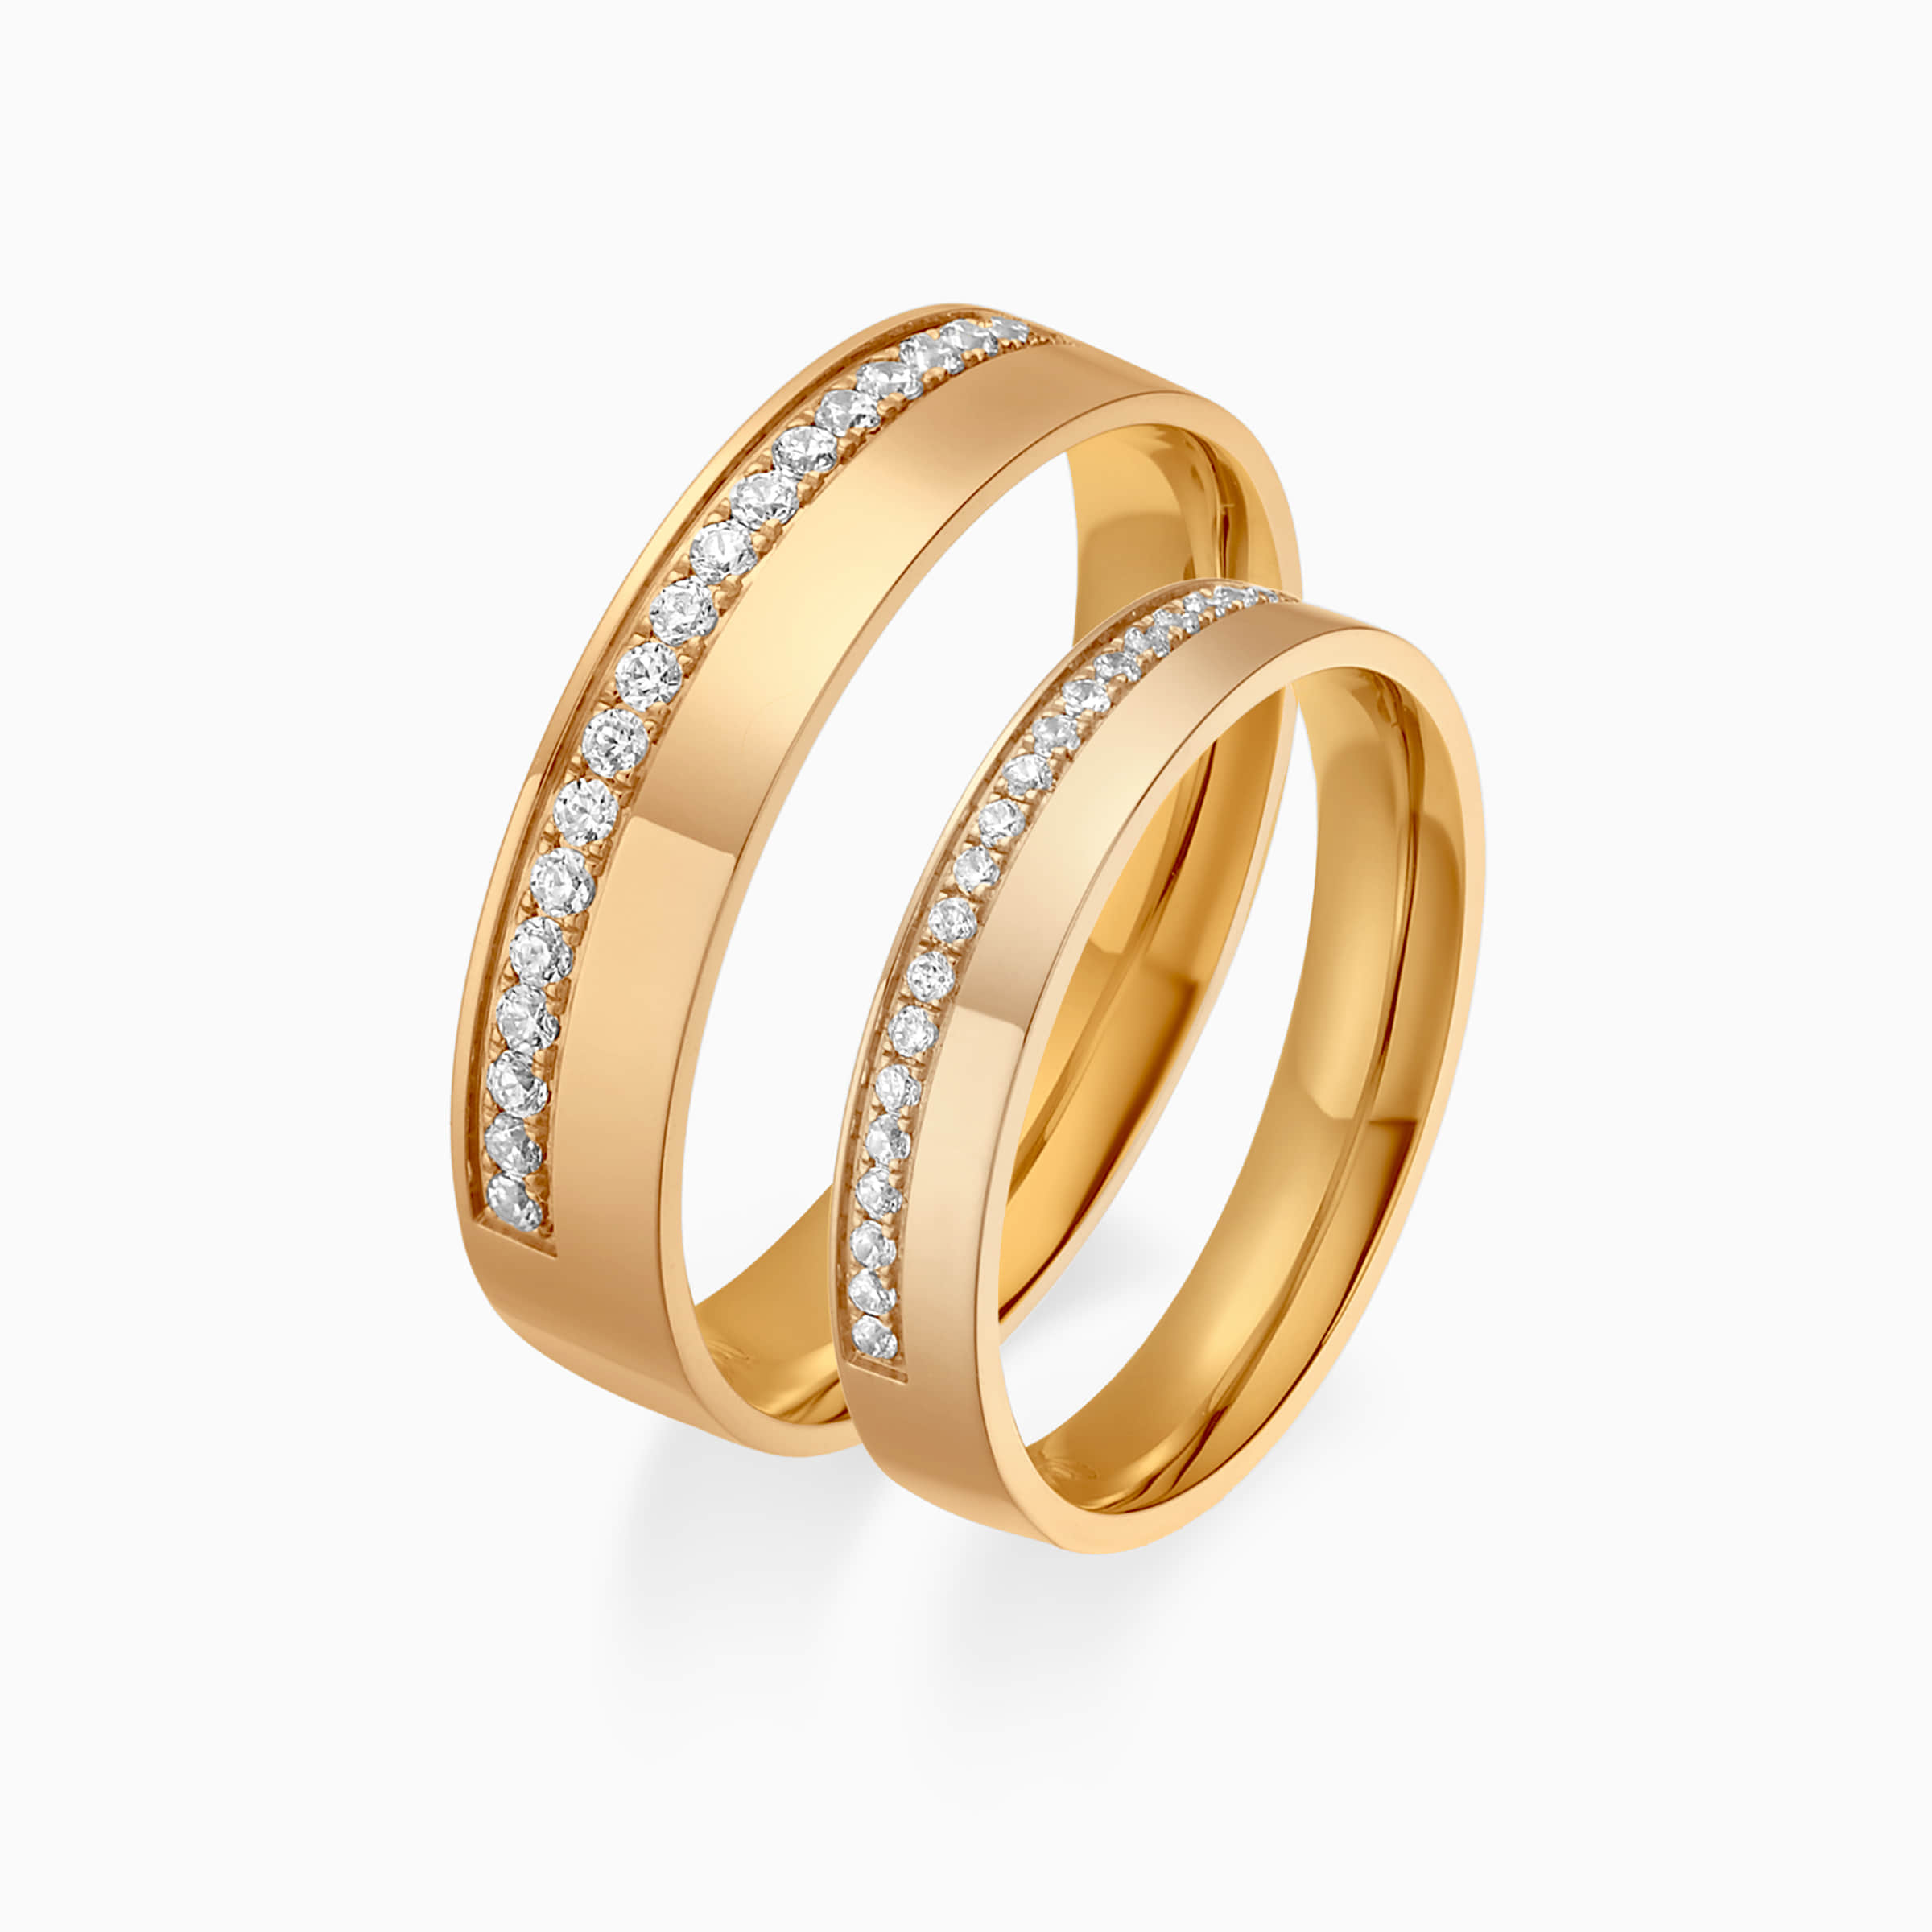 Darry Ring eternity diamond band ring in yellow gold